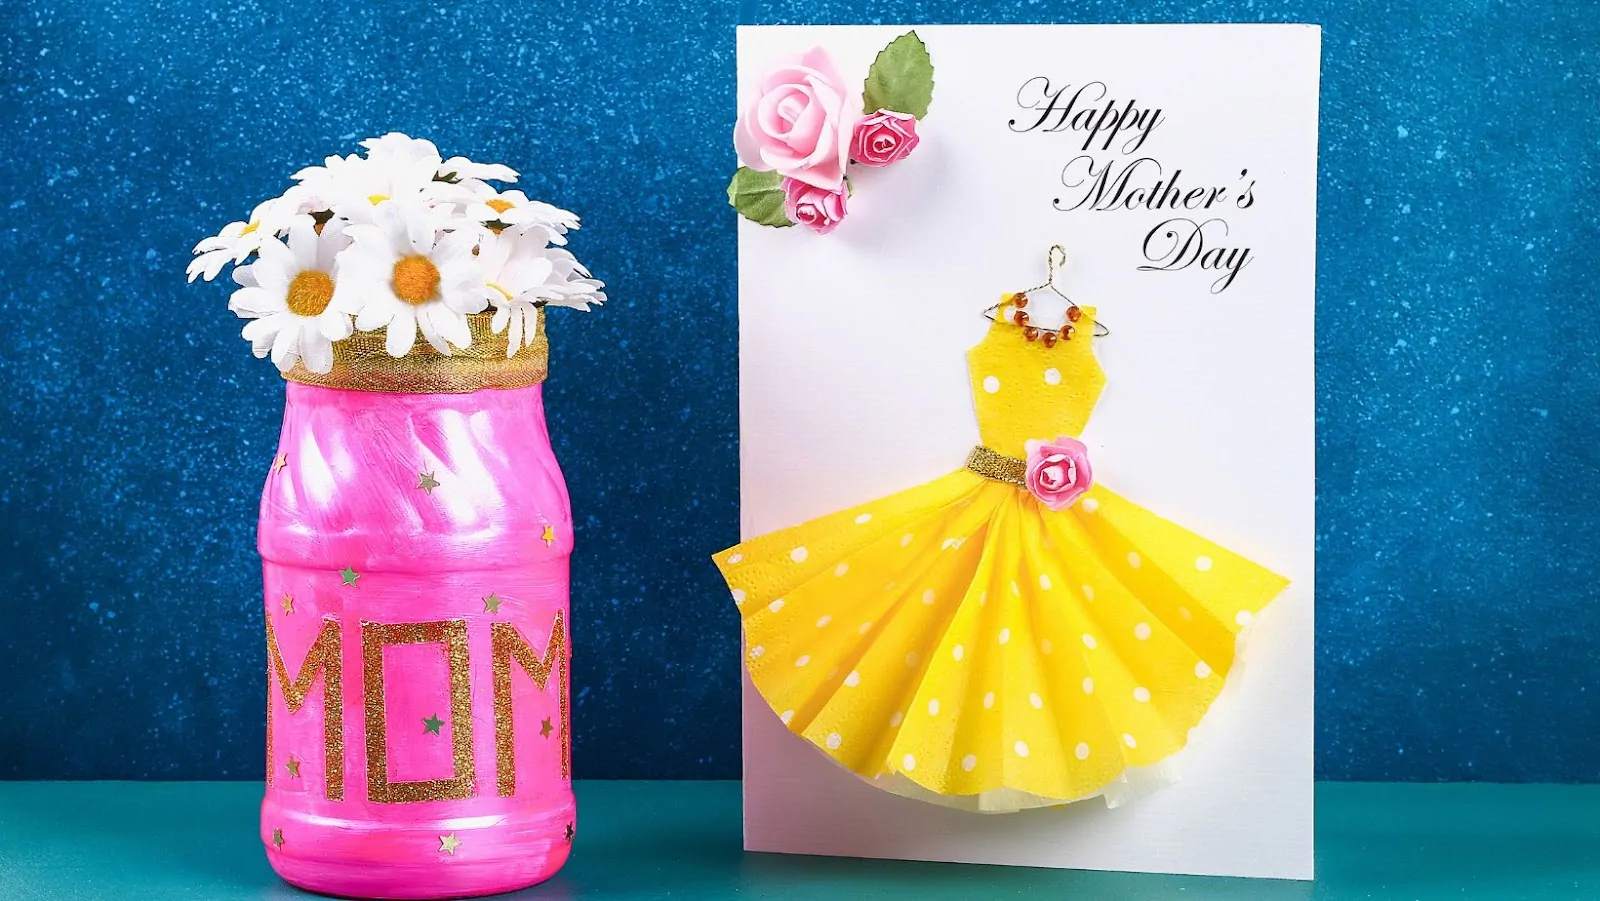 Mother's day gifts under $20 (6)